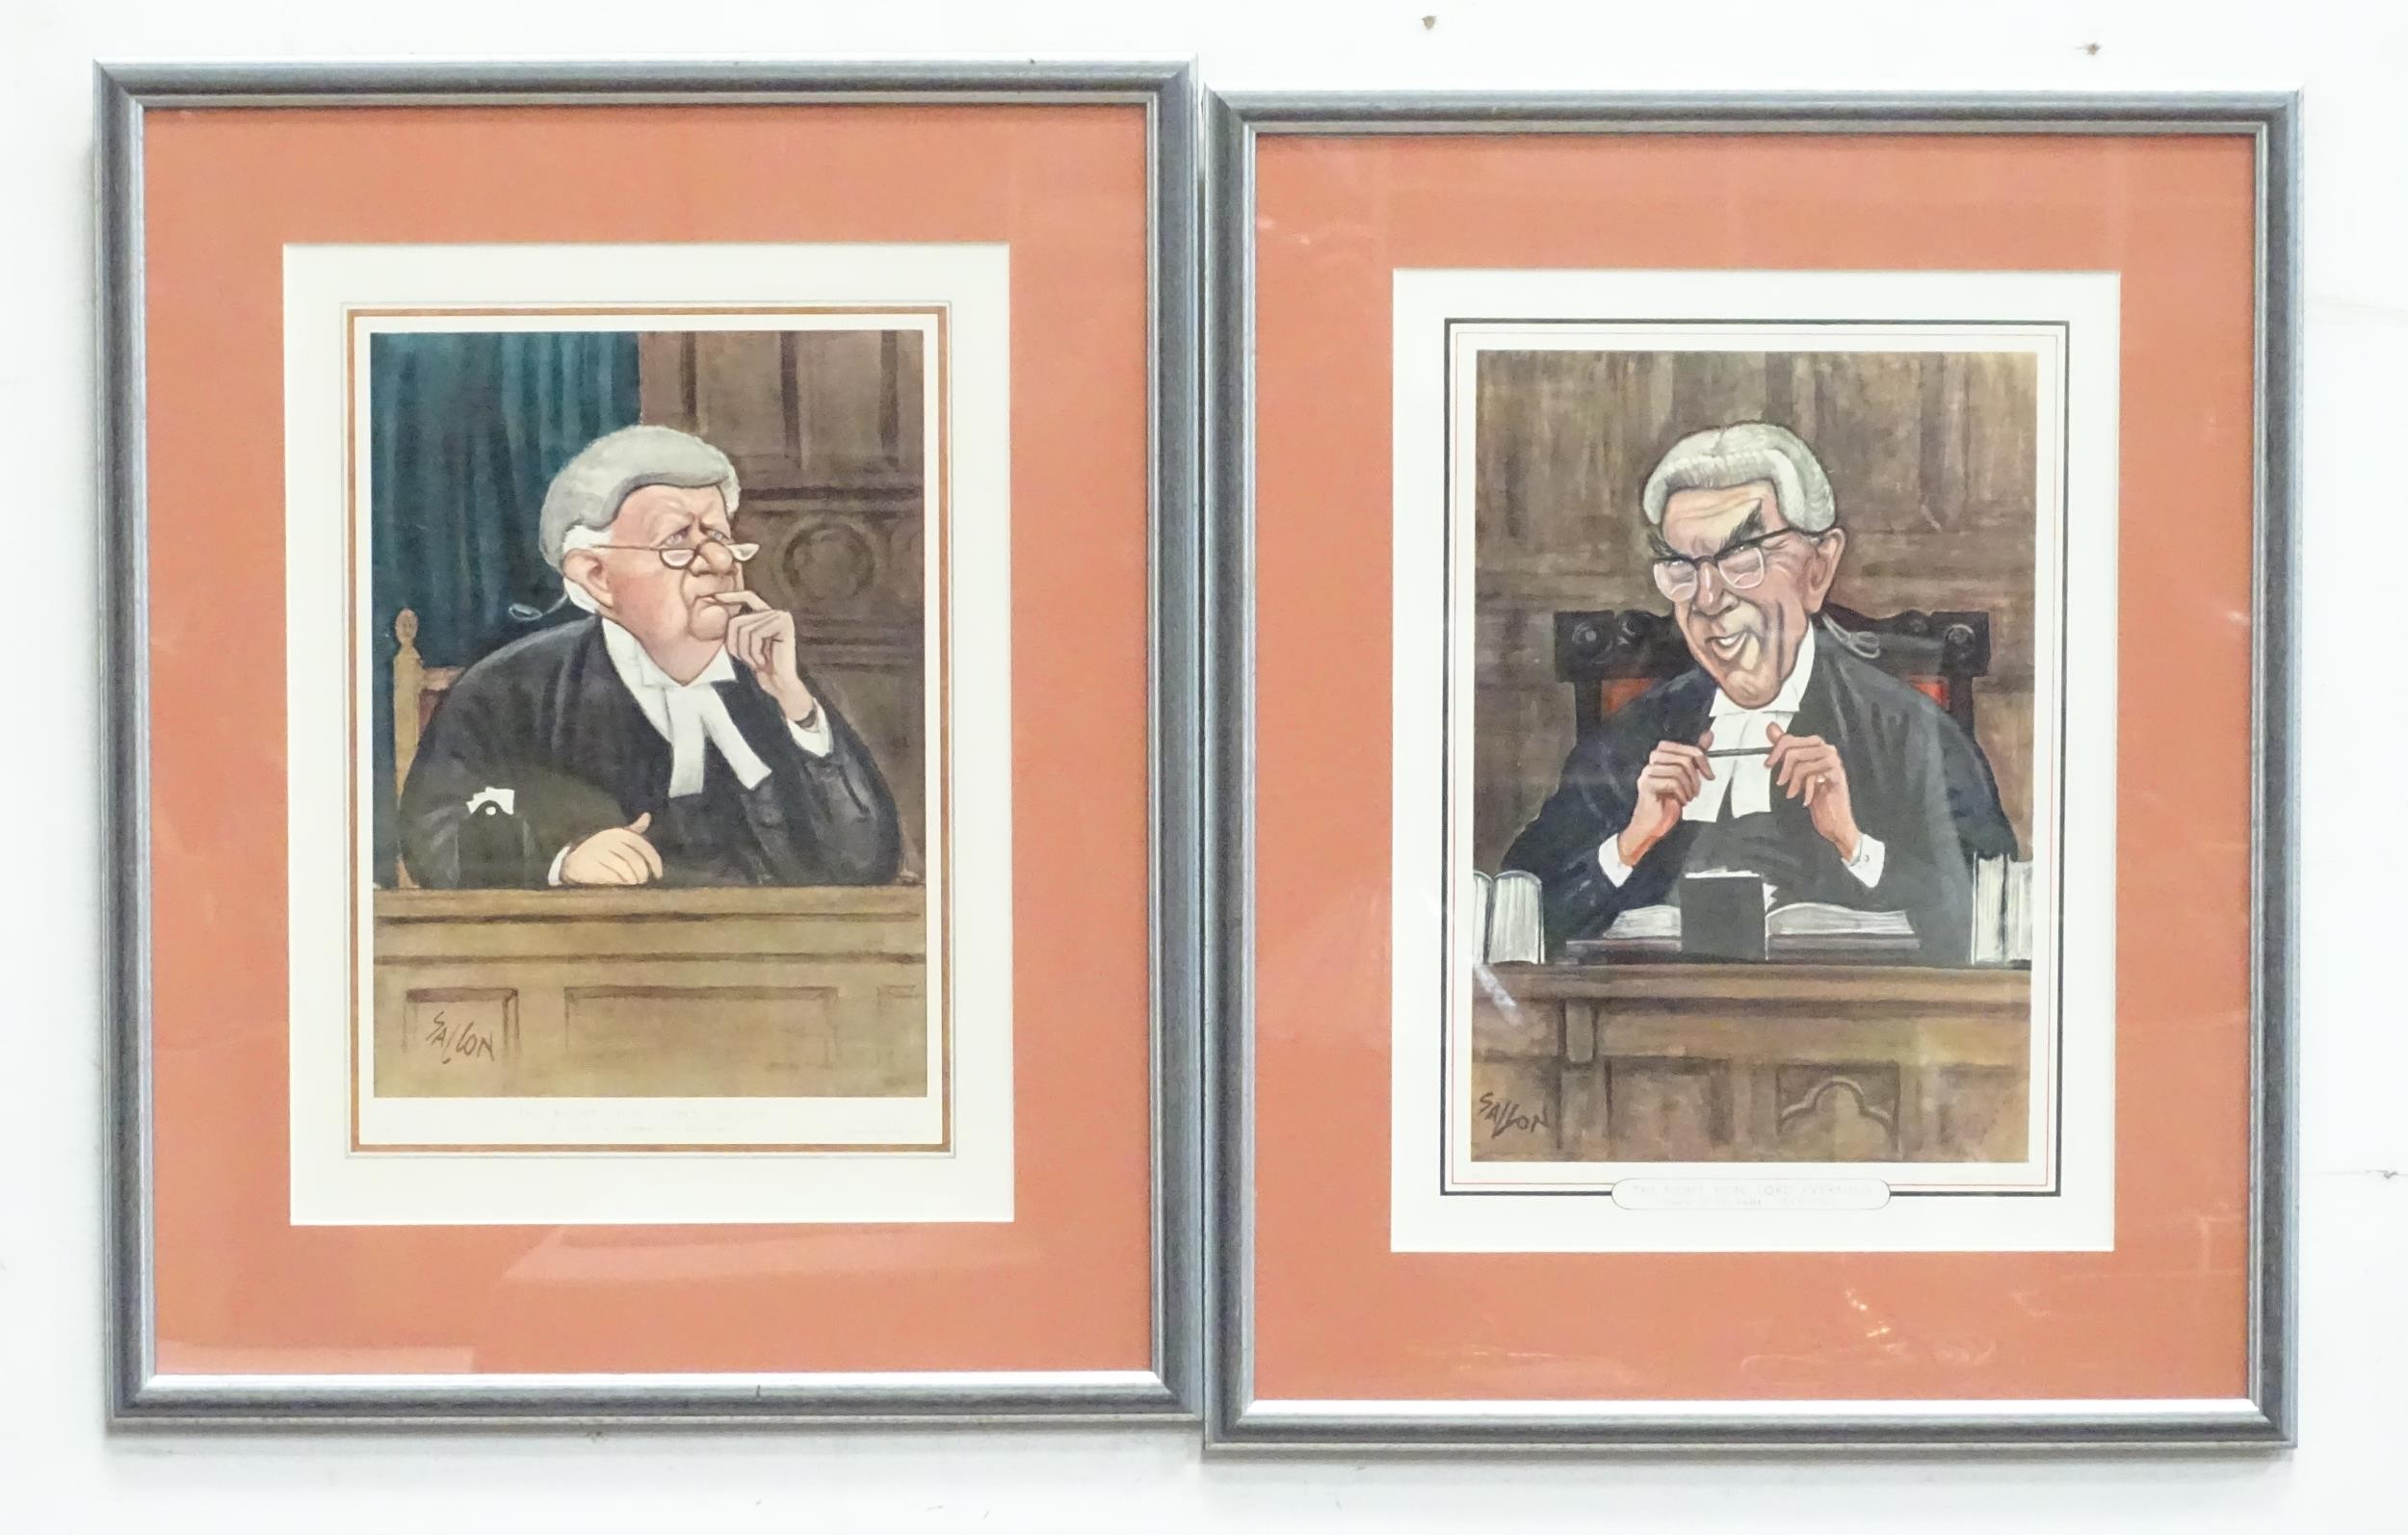 Two colour prints depicting judges - The Right Hon. Lord Evershed and The Right Hon. Lord Upjohn,